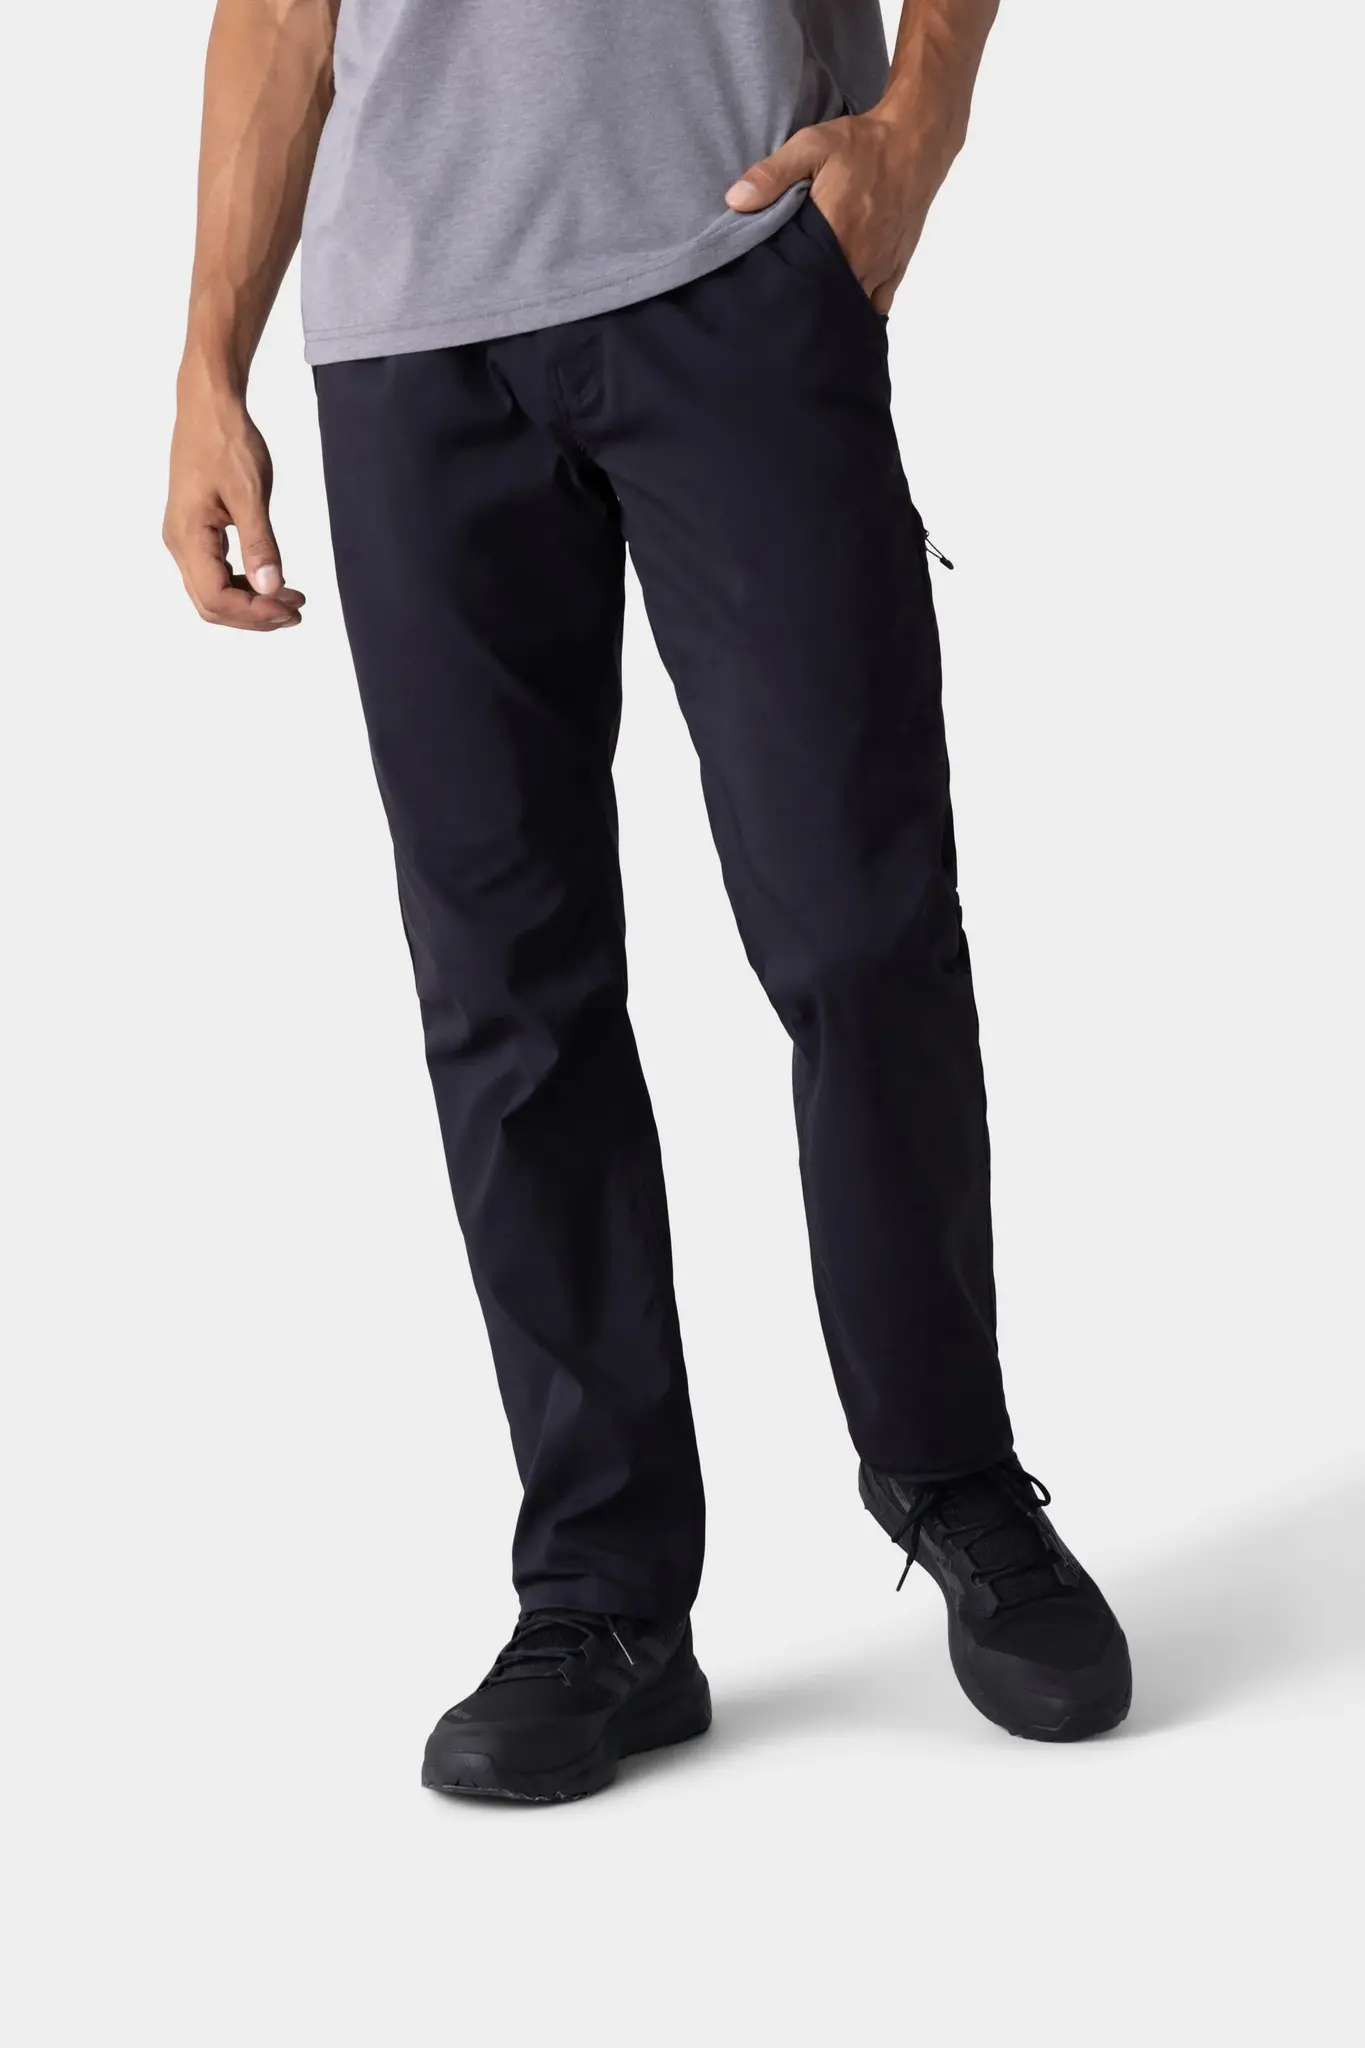 686 686 Men's Everywhere Pant - Relaxed Fit